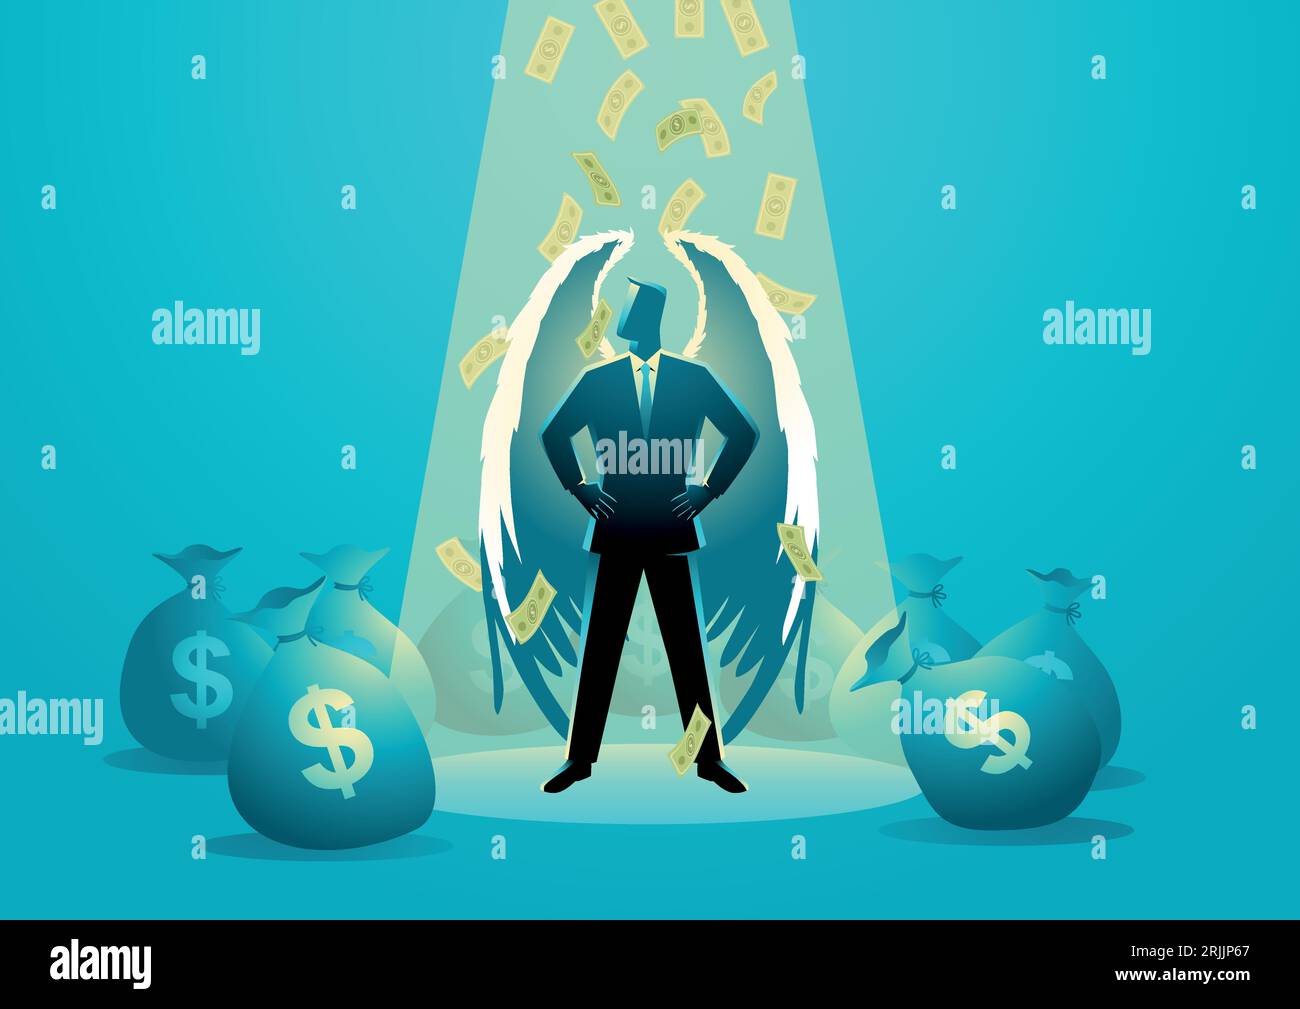 Business concept vector illustration of an angel businessman standing under spotlight with money rain and bags around him. Angel investor concept Stock Vector